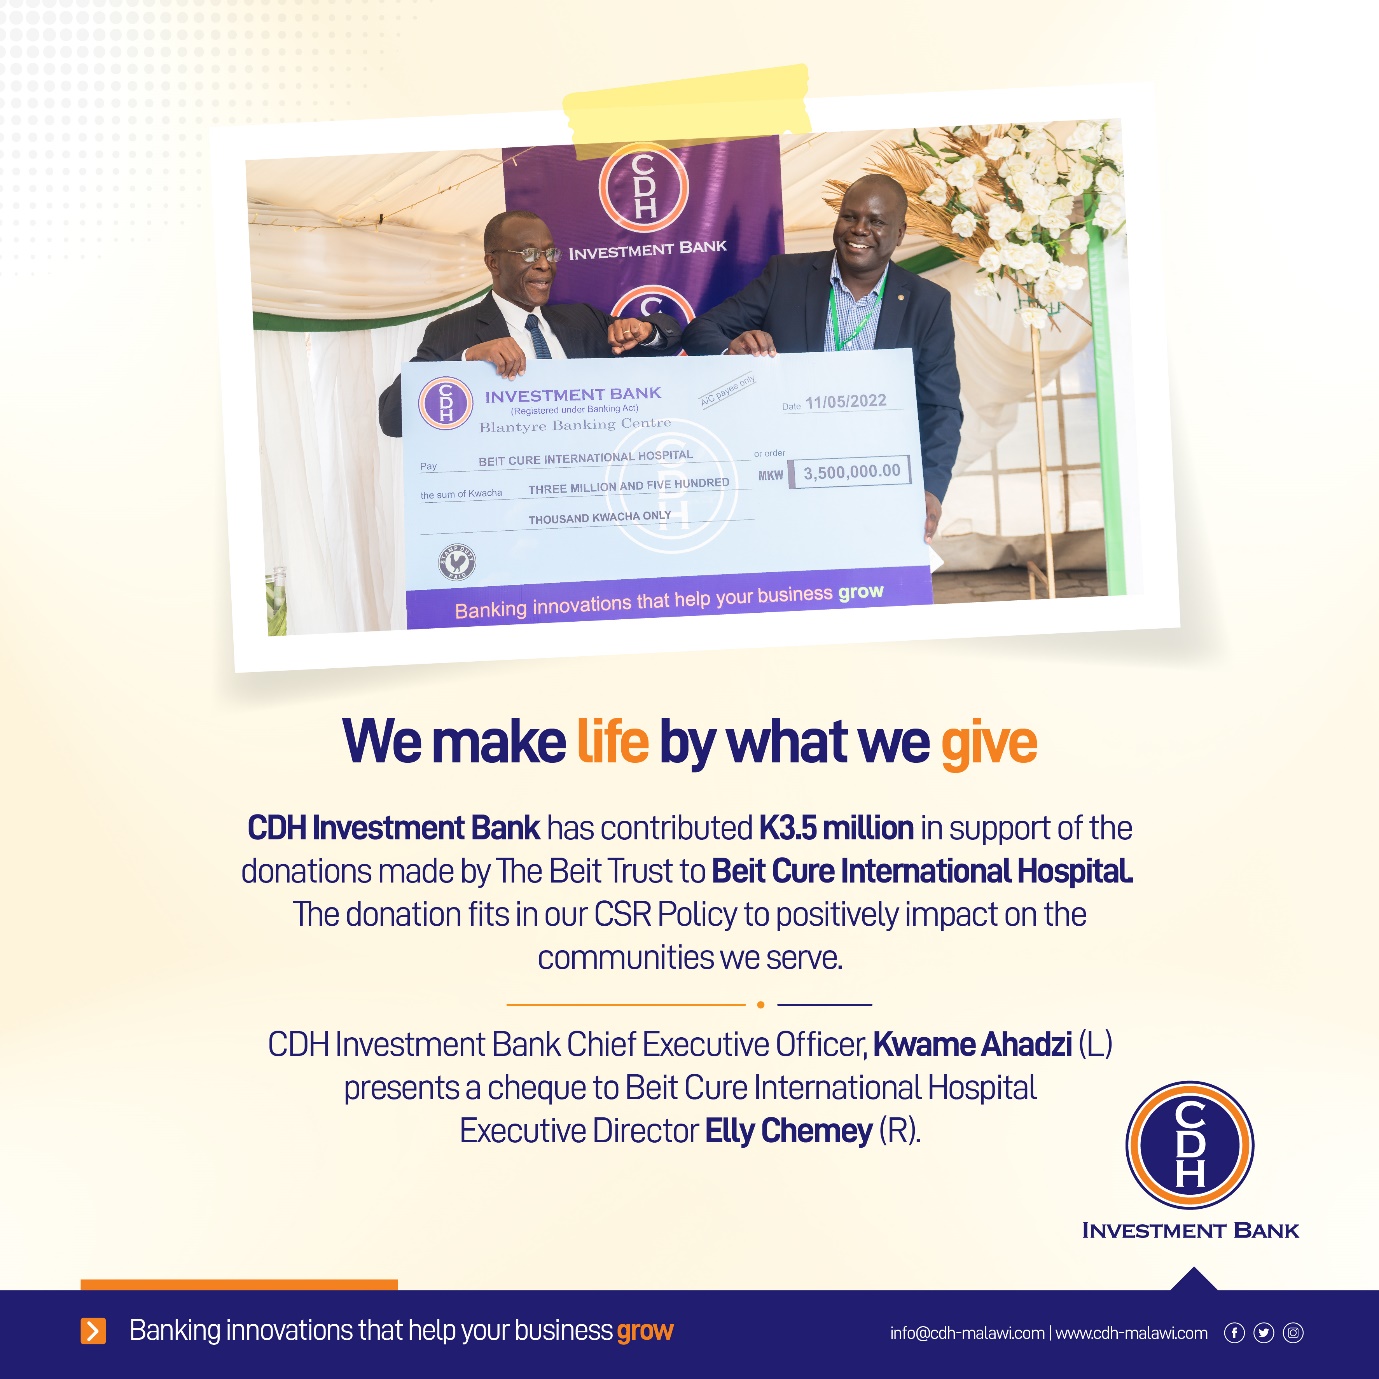 In the picture: CDH Investment Bank Chief Executive Officer, Mr Kwame Ahadzi (L) presents a cheque to Beit Cure International Hospital Executive Director Mr Elly Chemey (R)